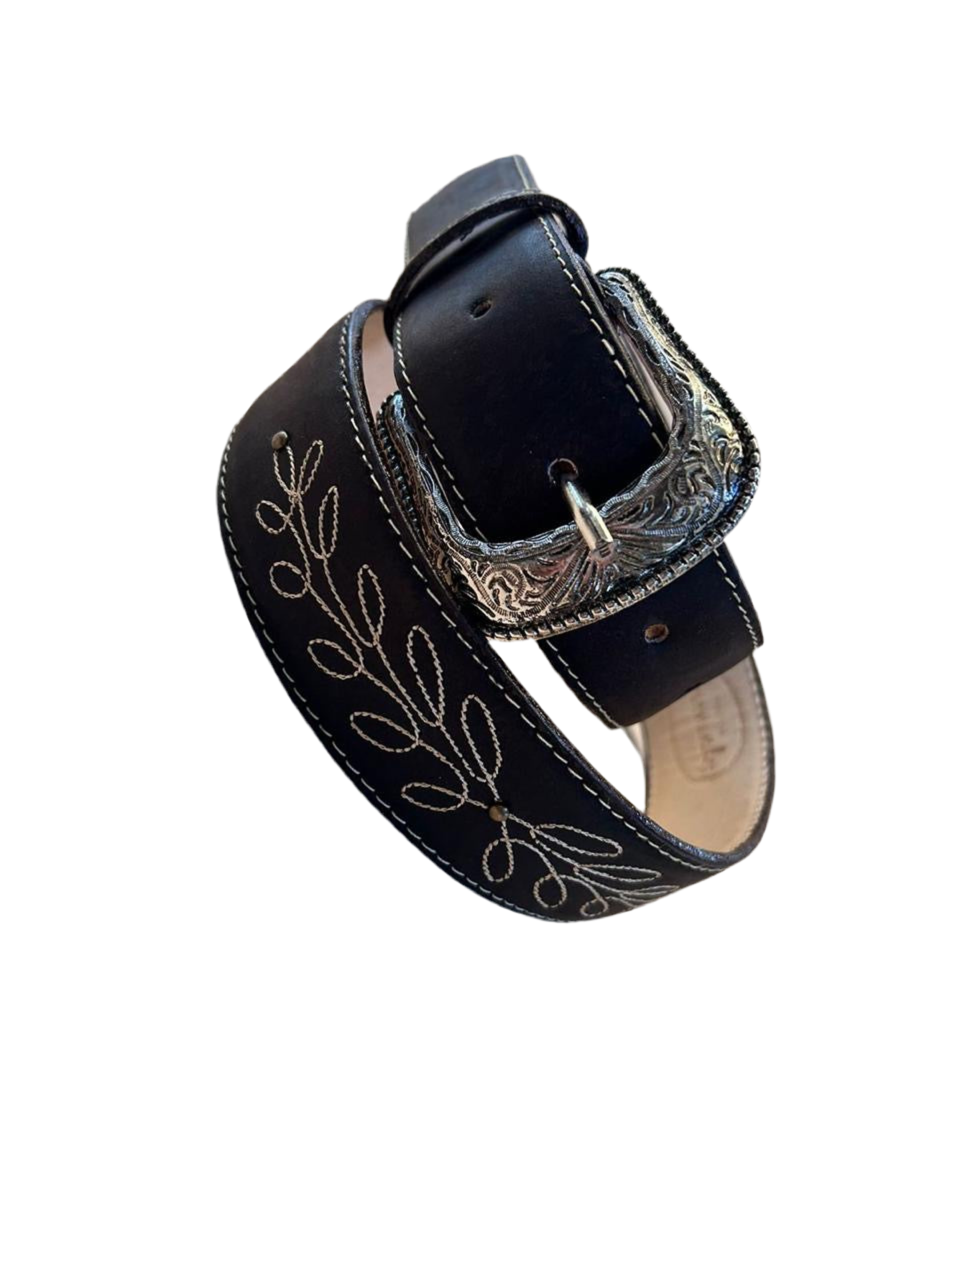 Black and Embroidered Leather Belt